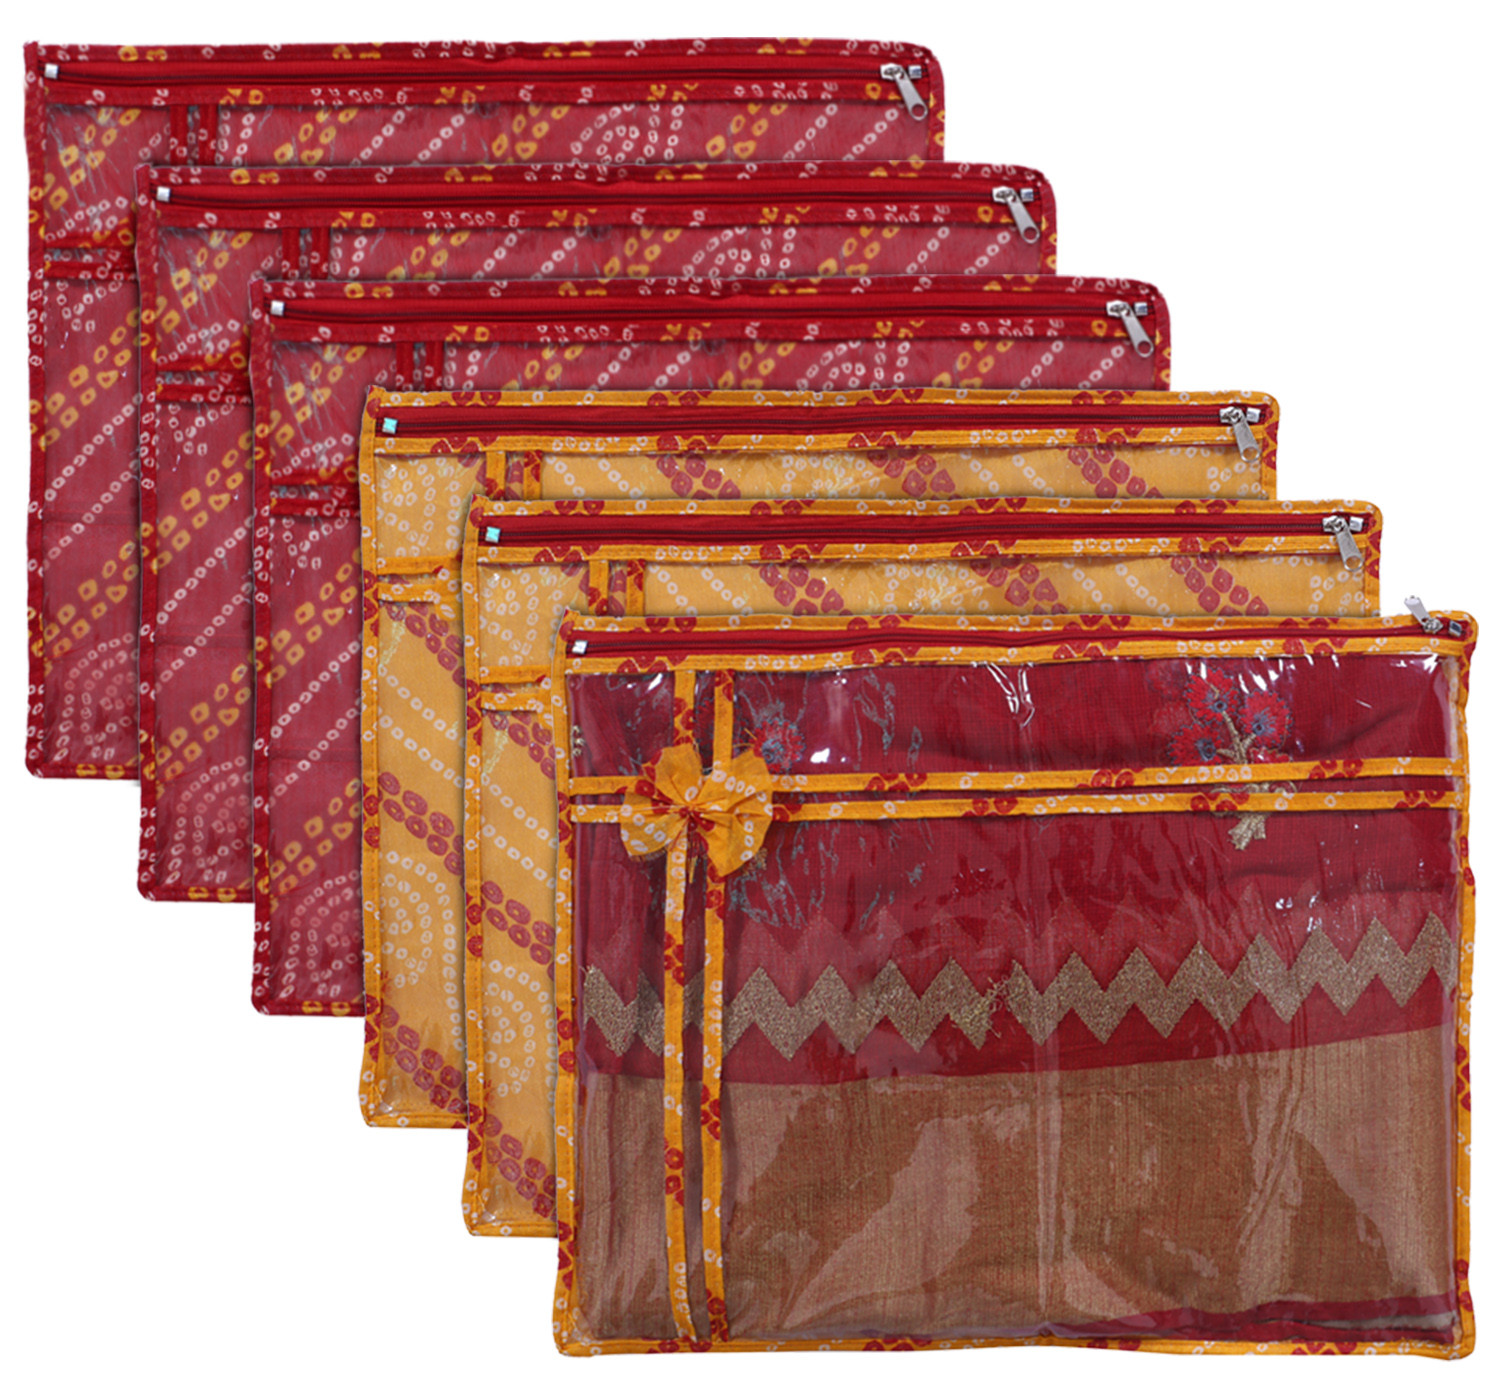 Kuber Industries Bandhani Print PVC Foldable Single Saree Cover|Clothes Storage For Saree, Lehenga, Suit With Transparent Pack of 6 (Red & Yellow)